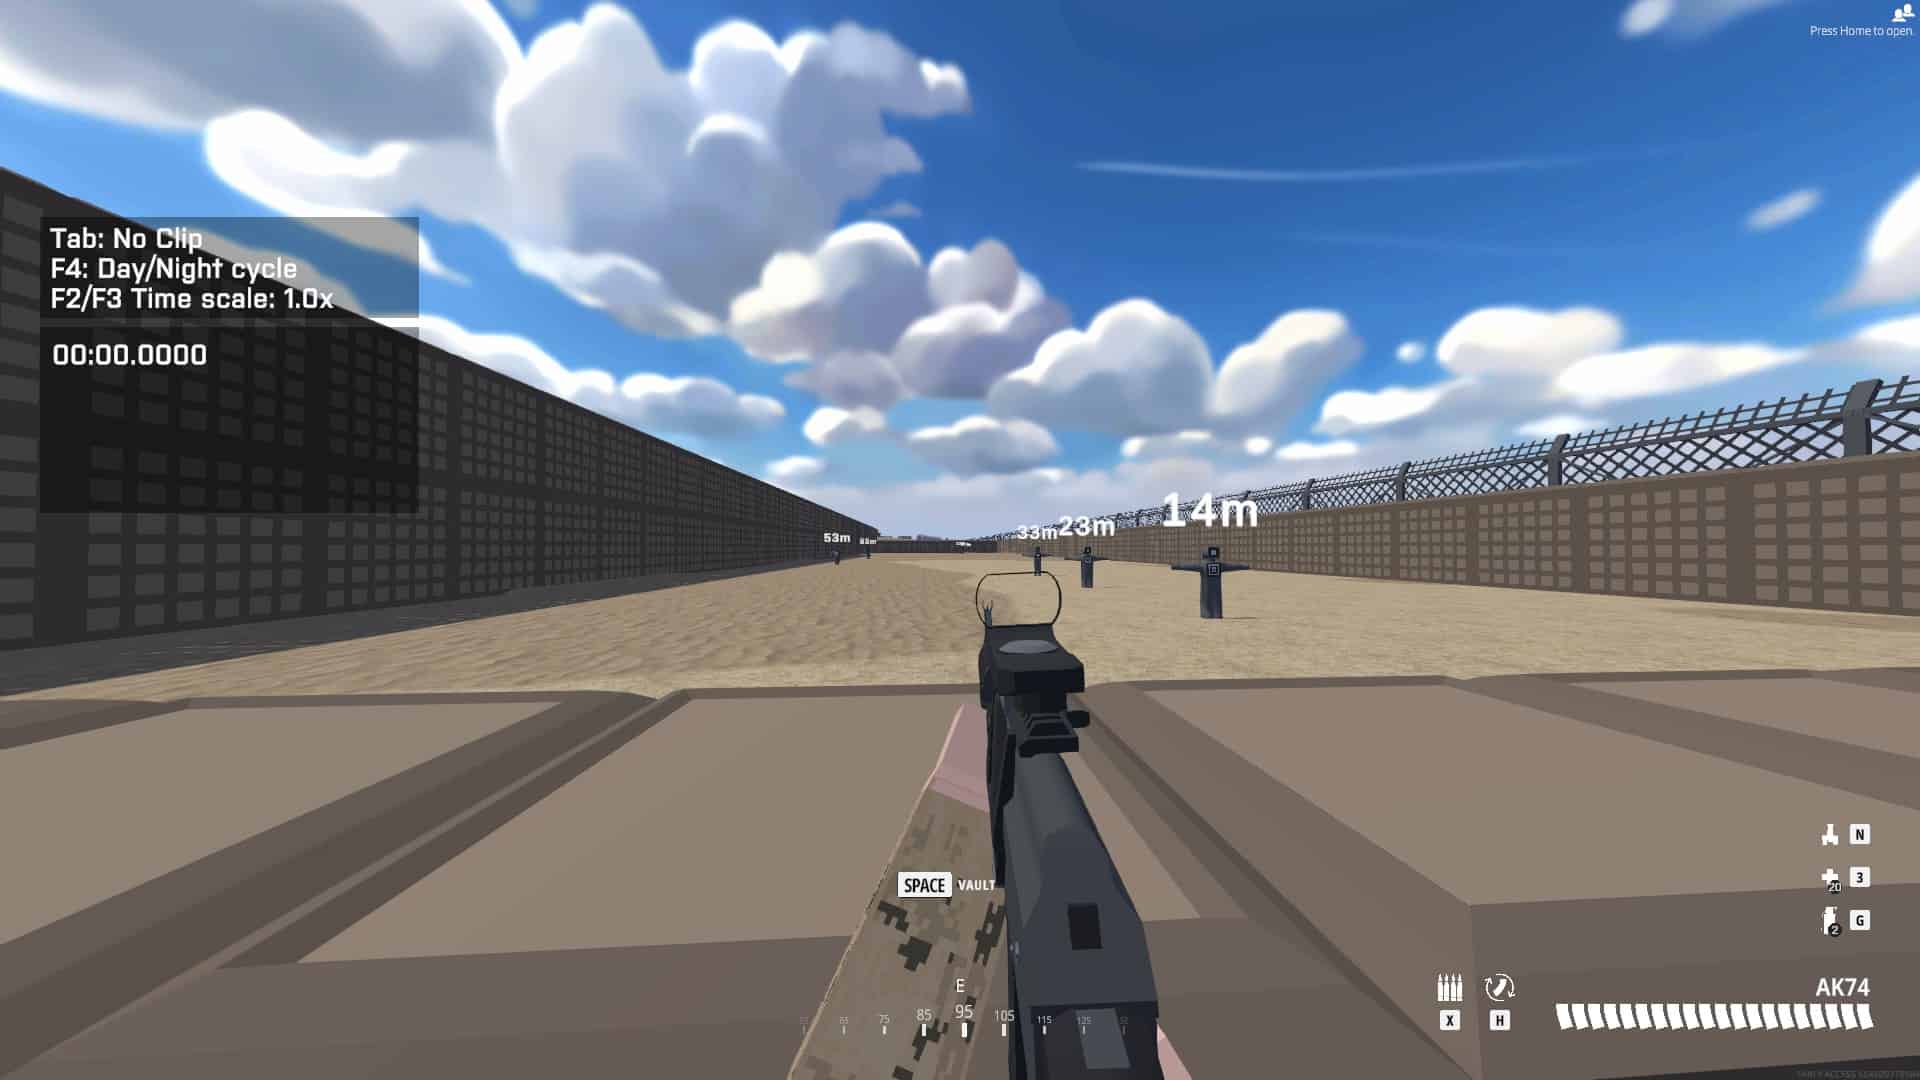 BattleBit Remastered best weapons: An image of the AK74 weapon used in a training range in BattleBit Remastered.